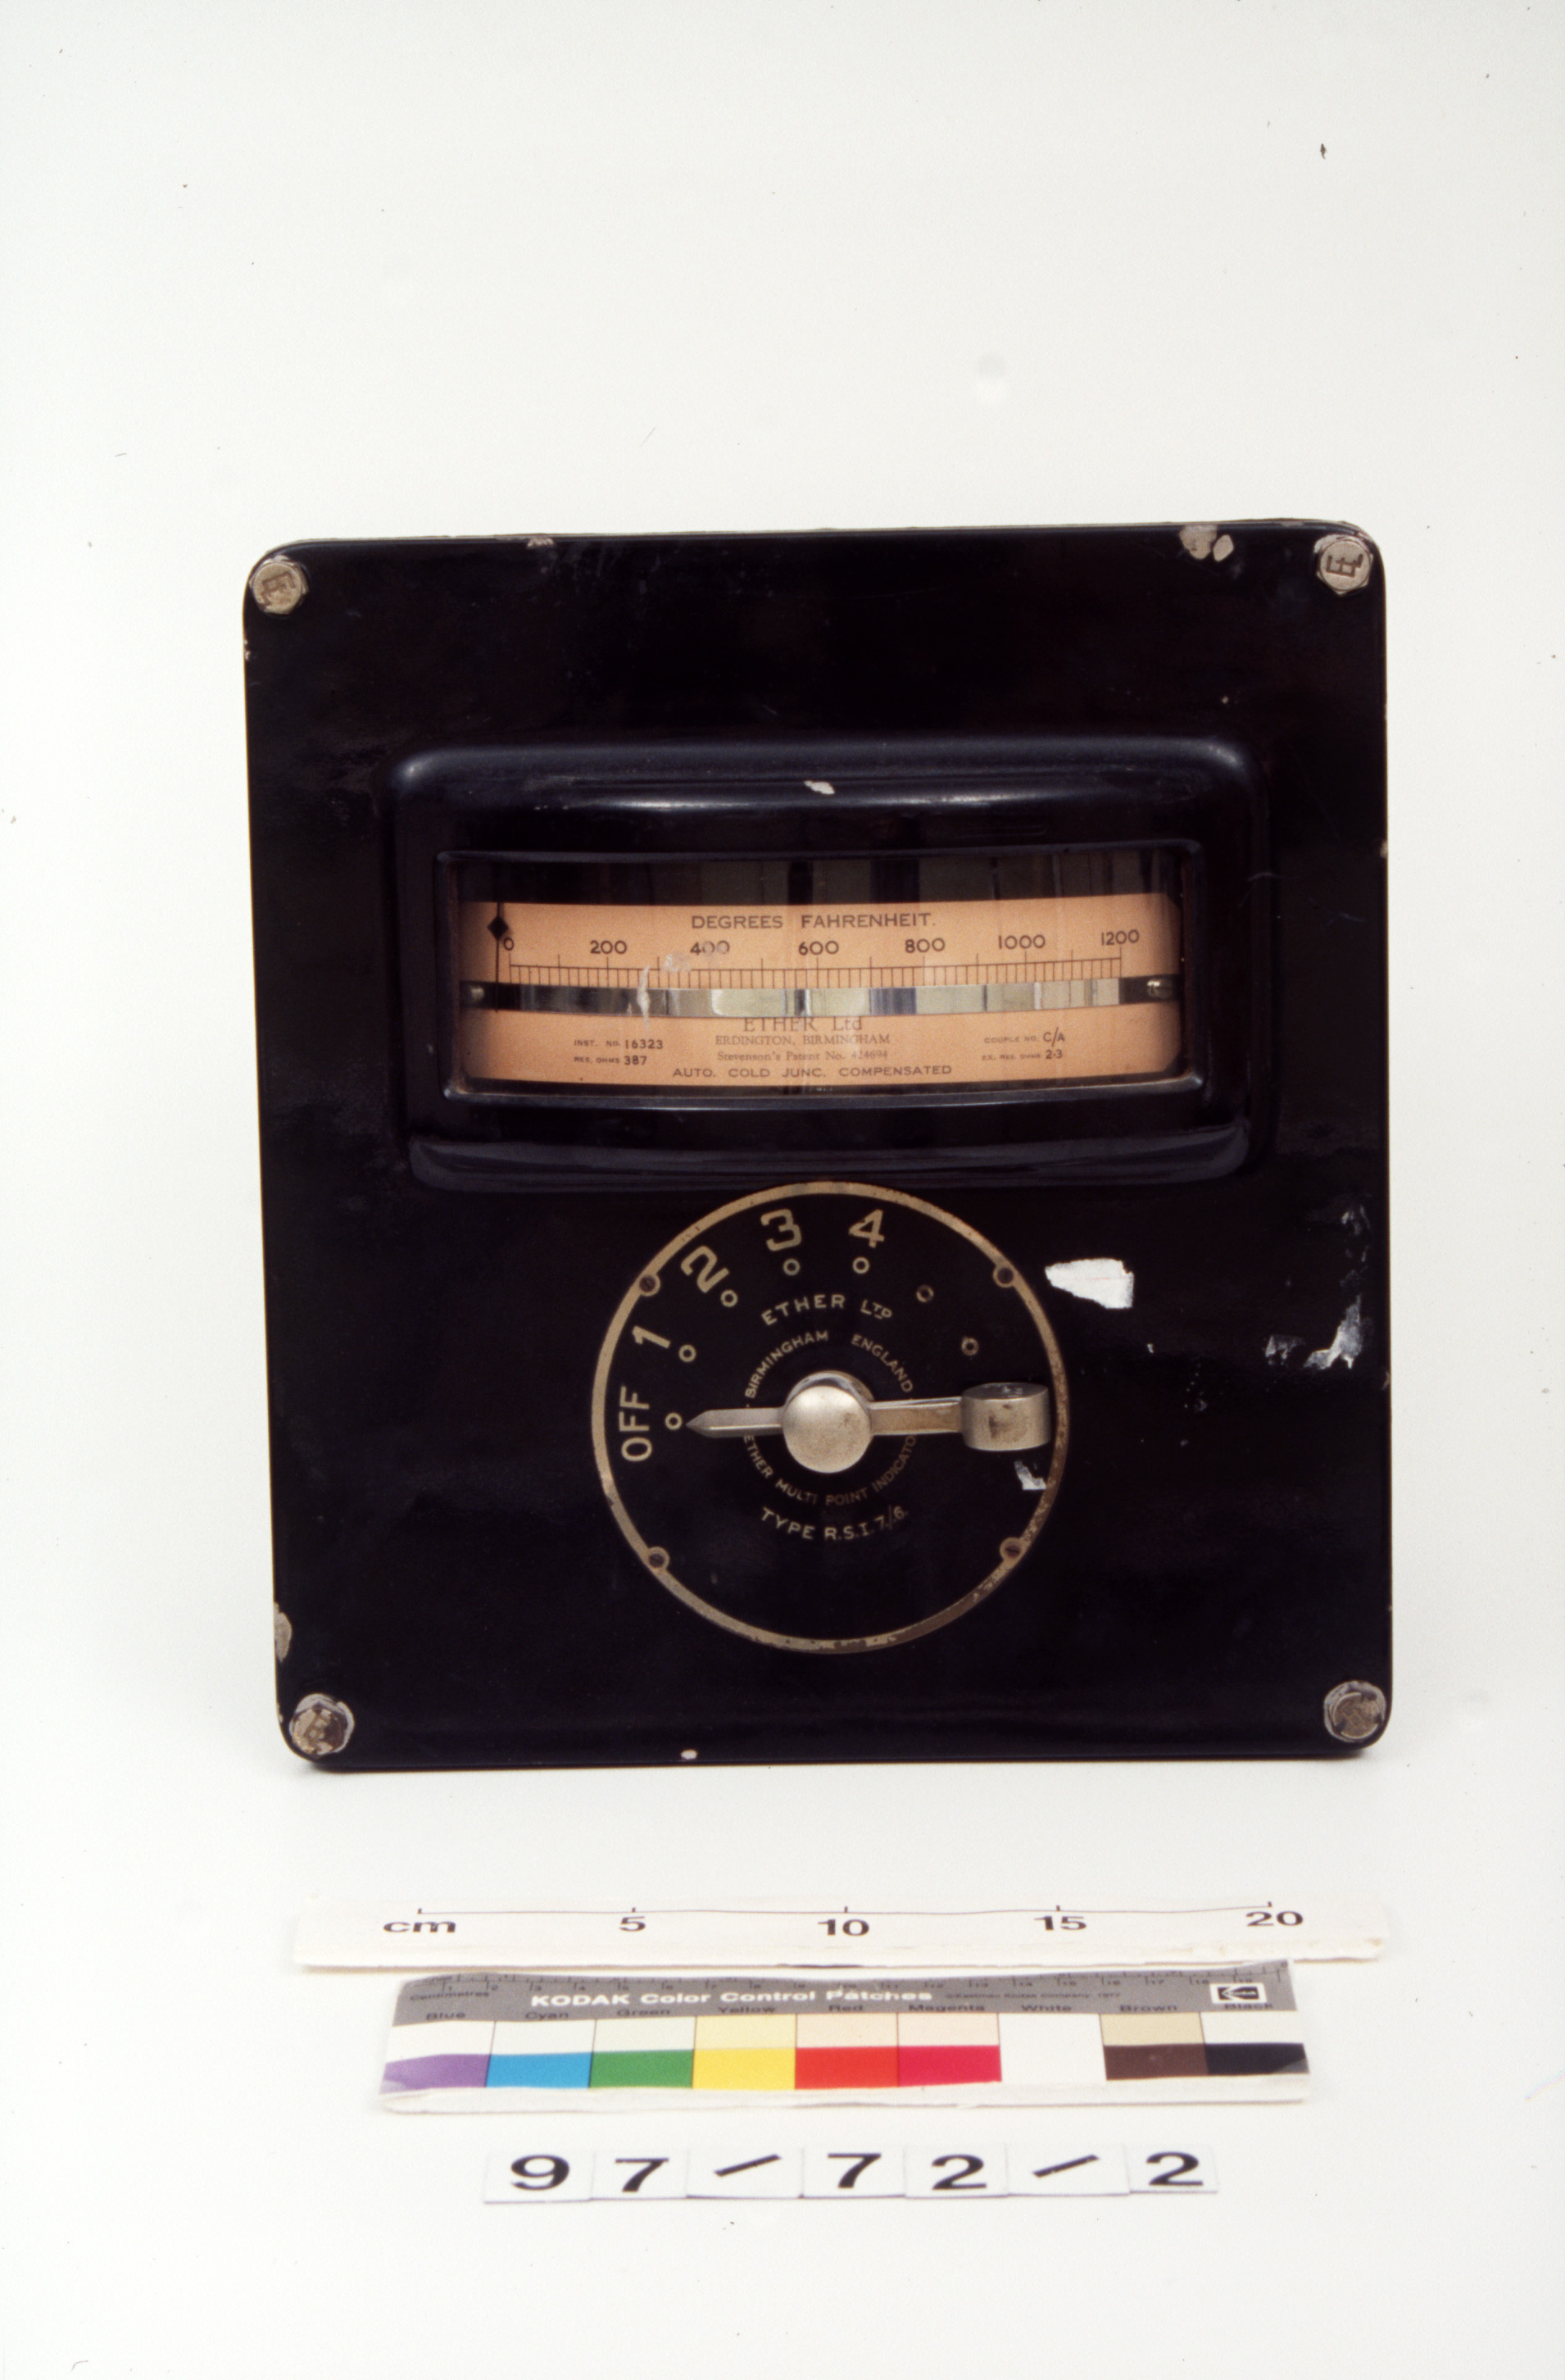 Thermocouple temperature gauge used at Grace Bros, Sydney